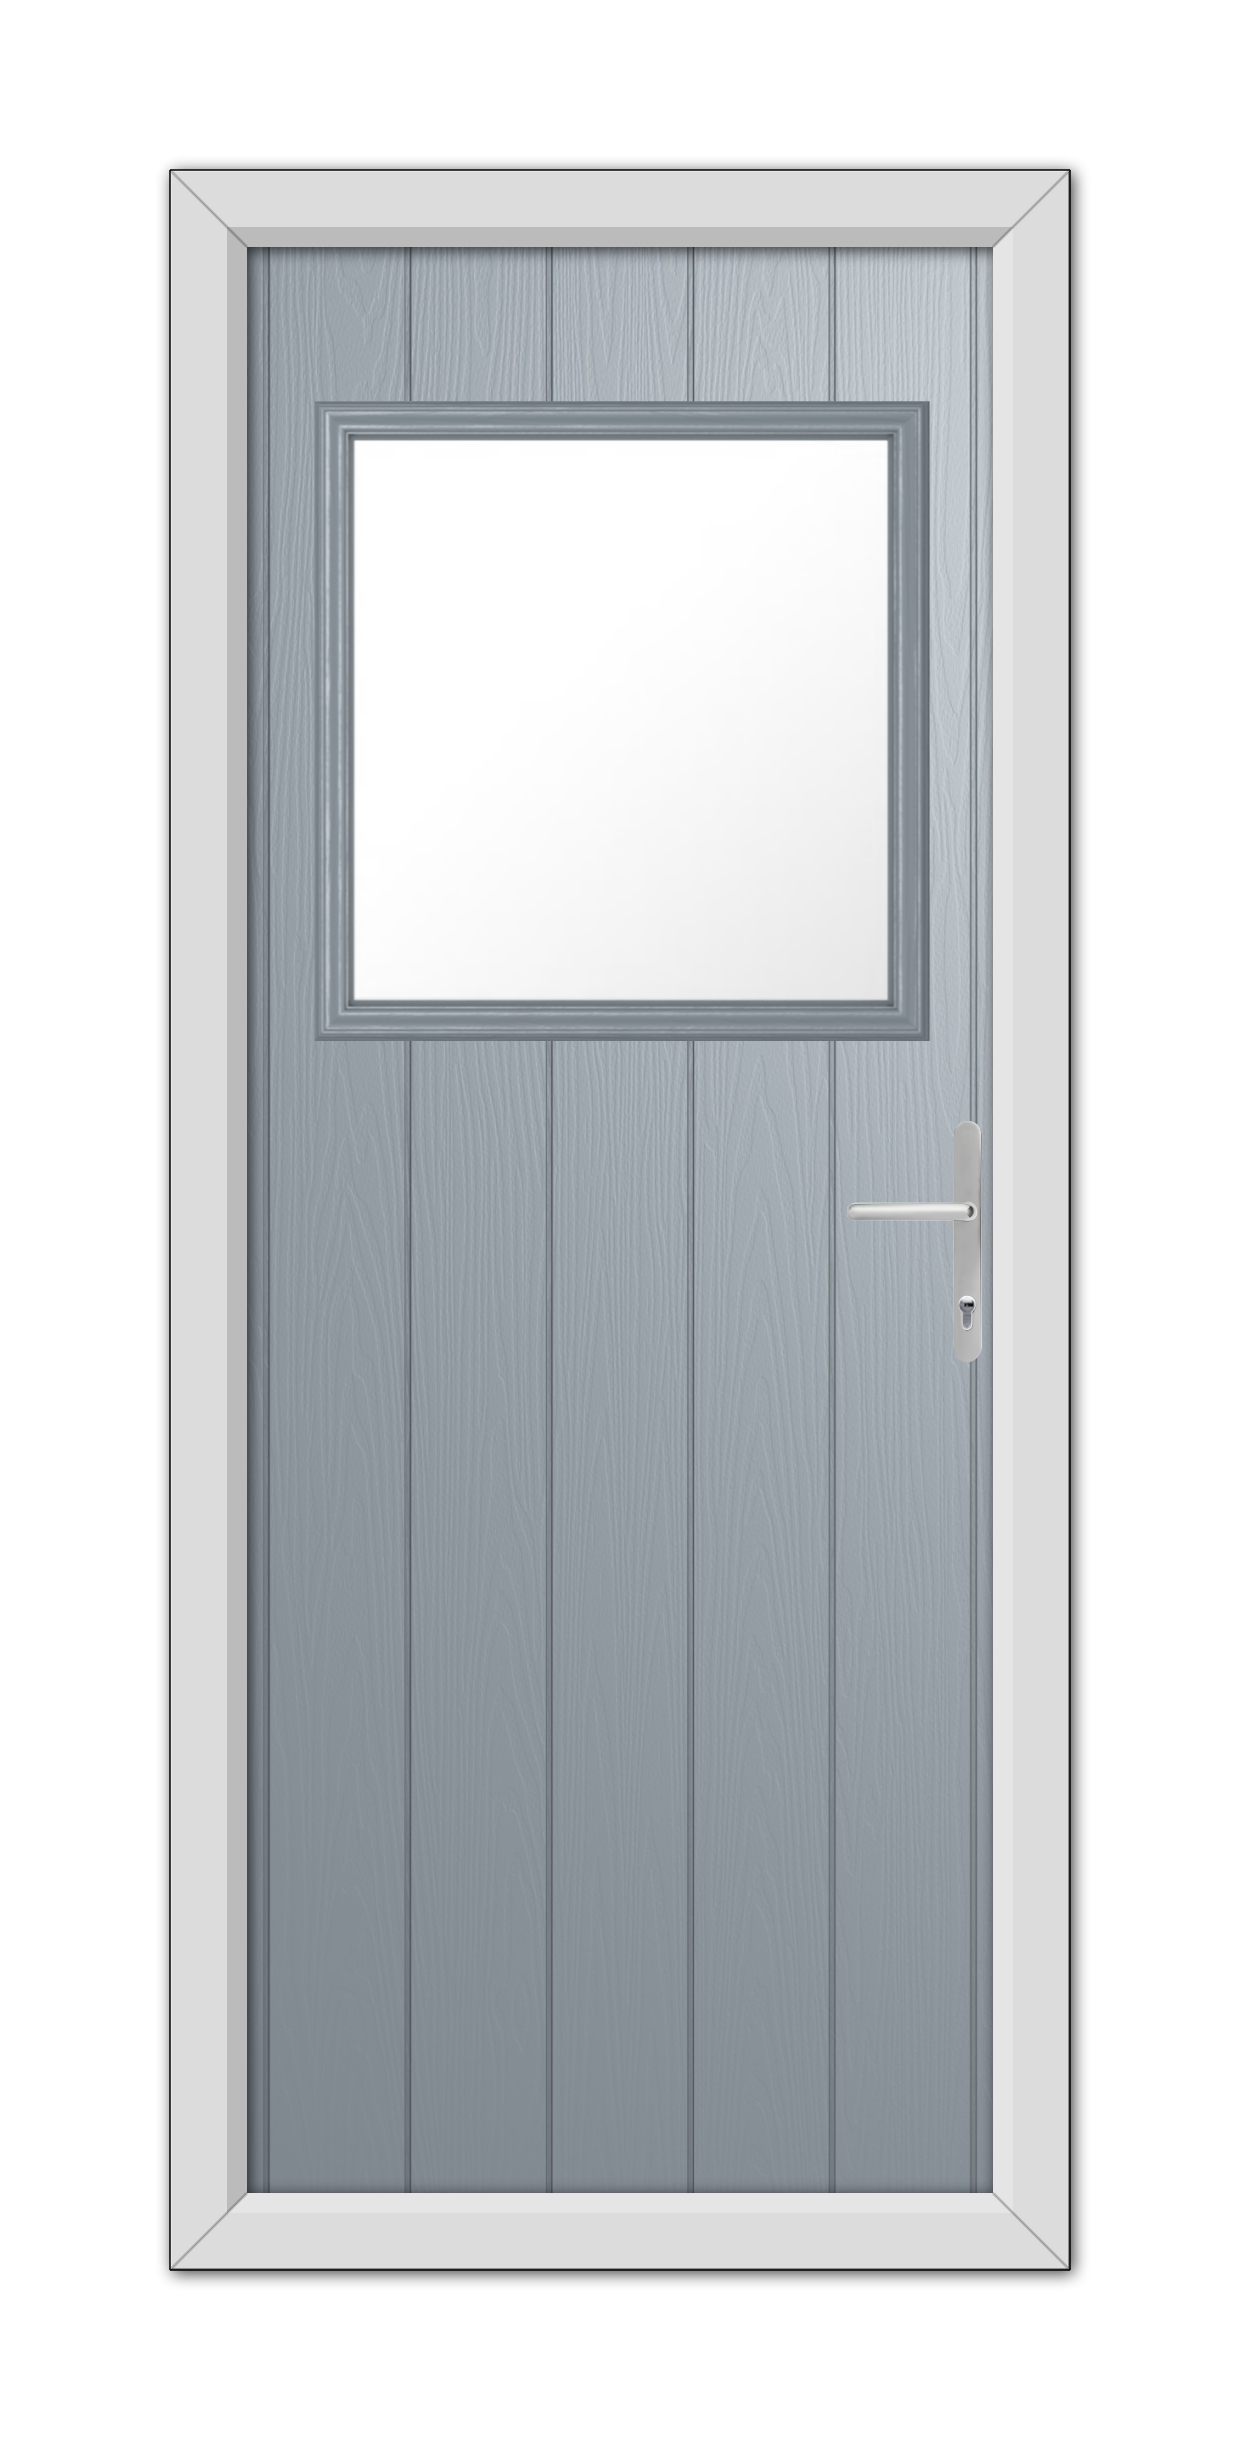 A modern French Grey Fife Composite Door 48mm Timber Core with a vertical panel design and a rectangular window at the top, featuring a silver handle on the right side.